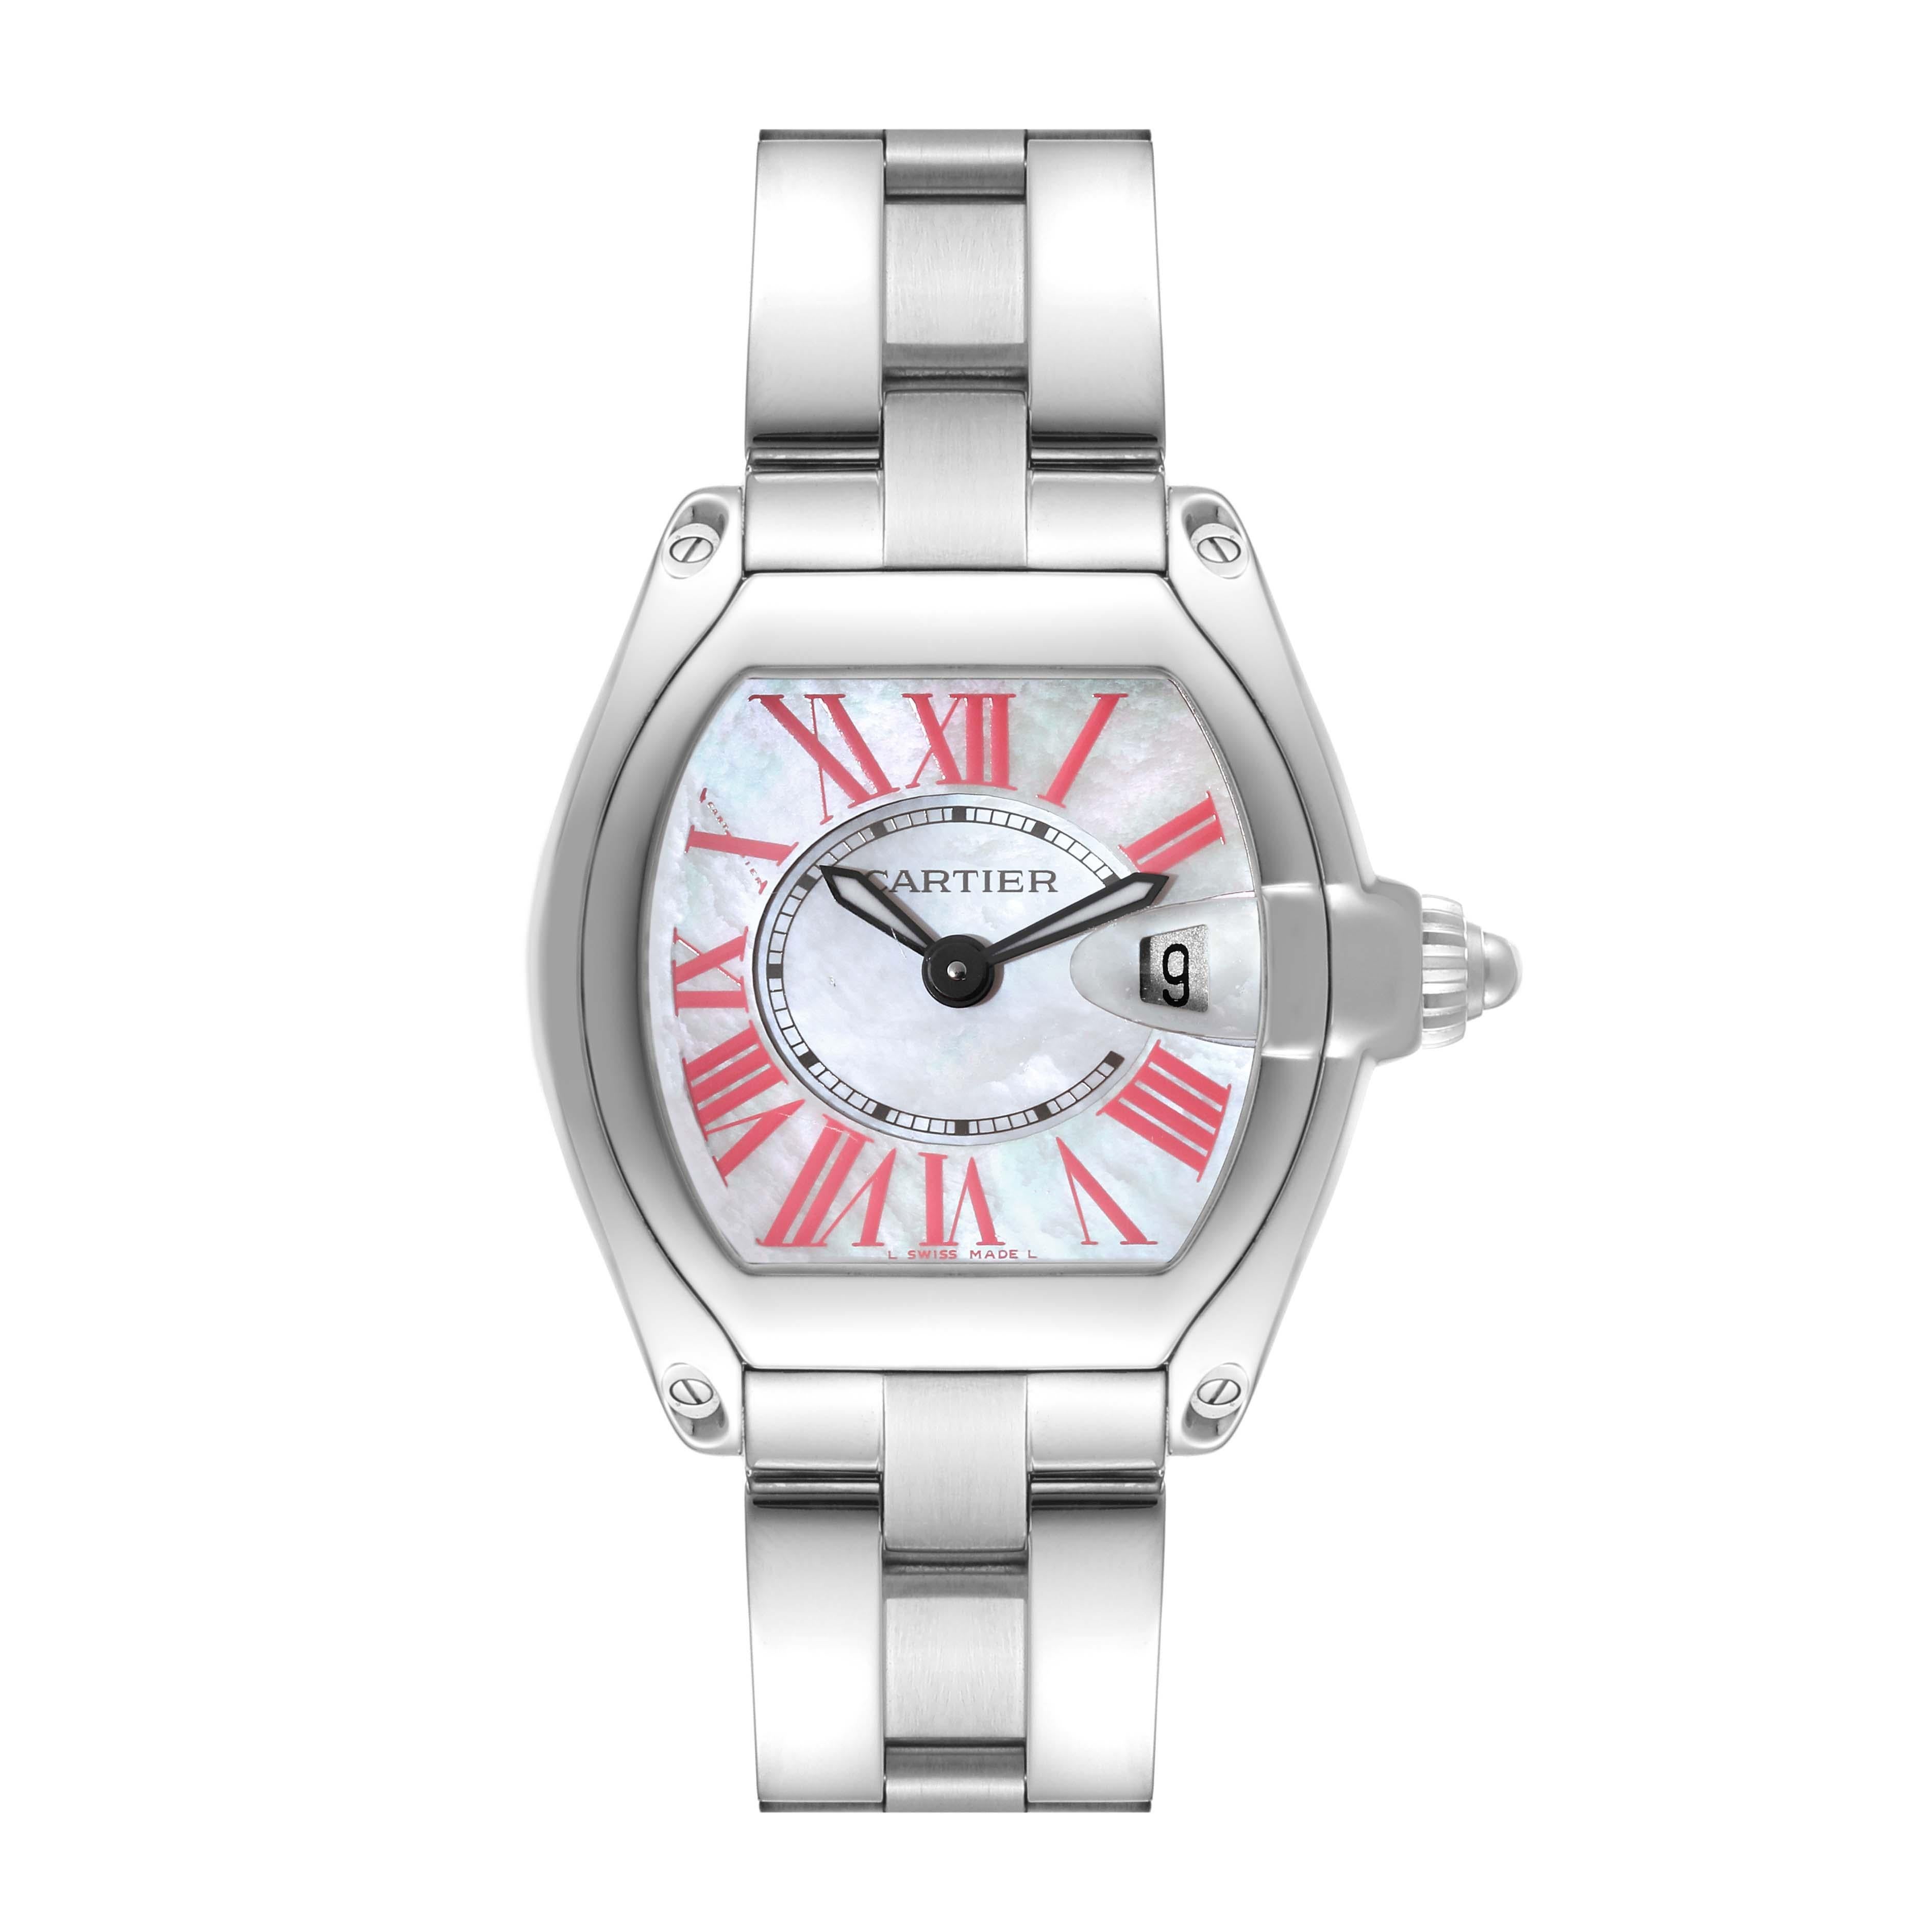 Cartier Roadster Mother of Pearl Dial Steel Ladies Watch W6206006. Swiss quartz movement. Stainless steel tonneau shaped case 36 x 30 mm. . Scratch resistant sapphire crystal with cyclops magnifier. Mother of pearl dial with pink Roman numerals.